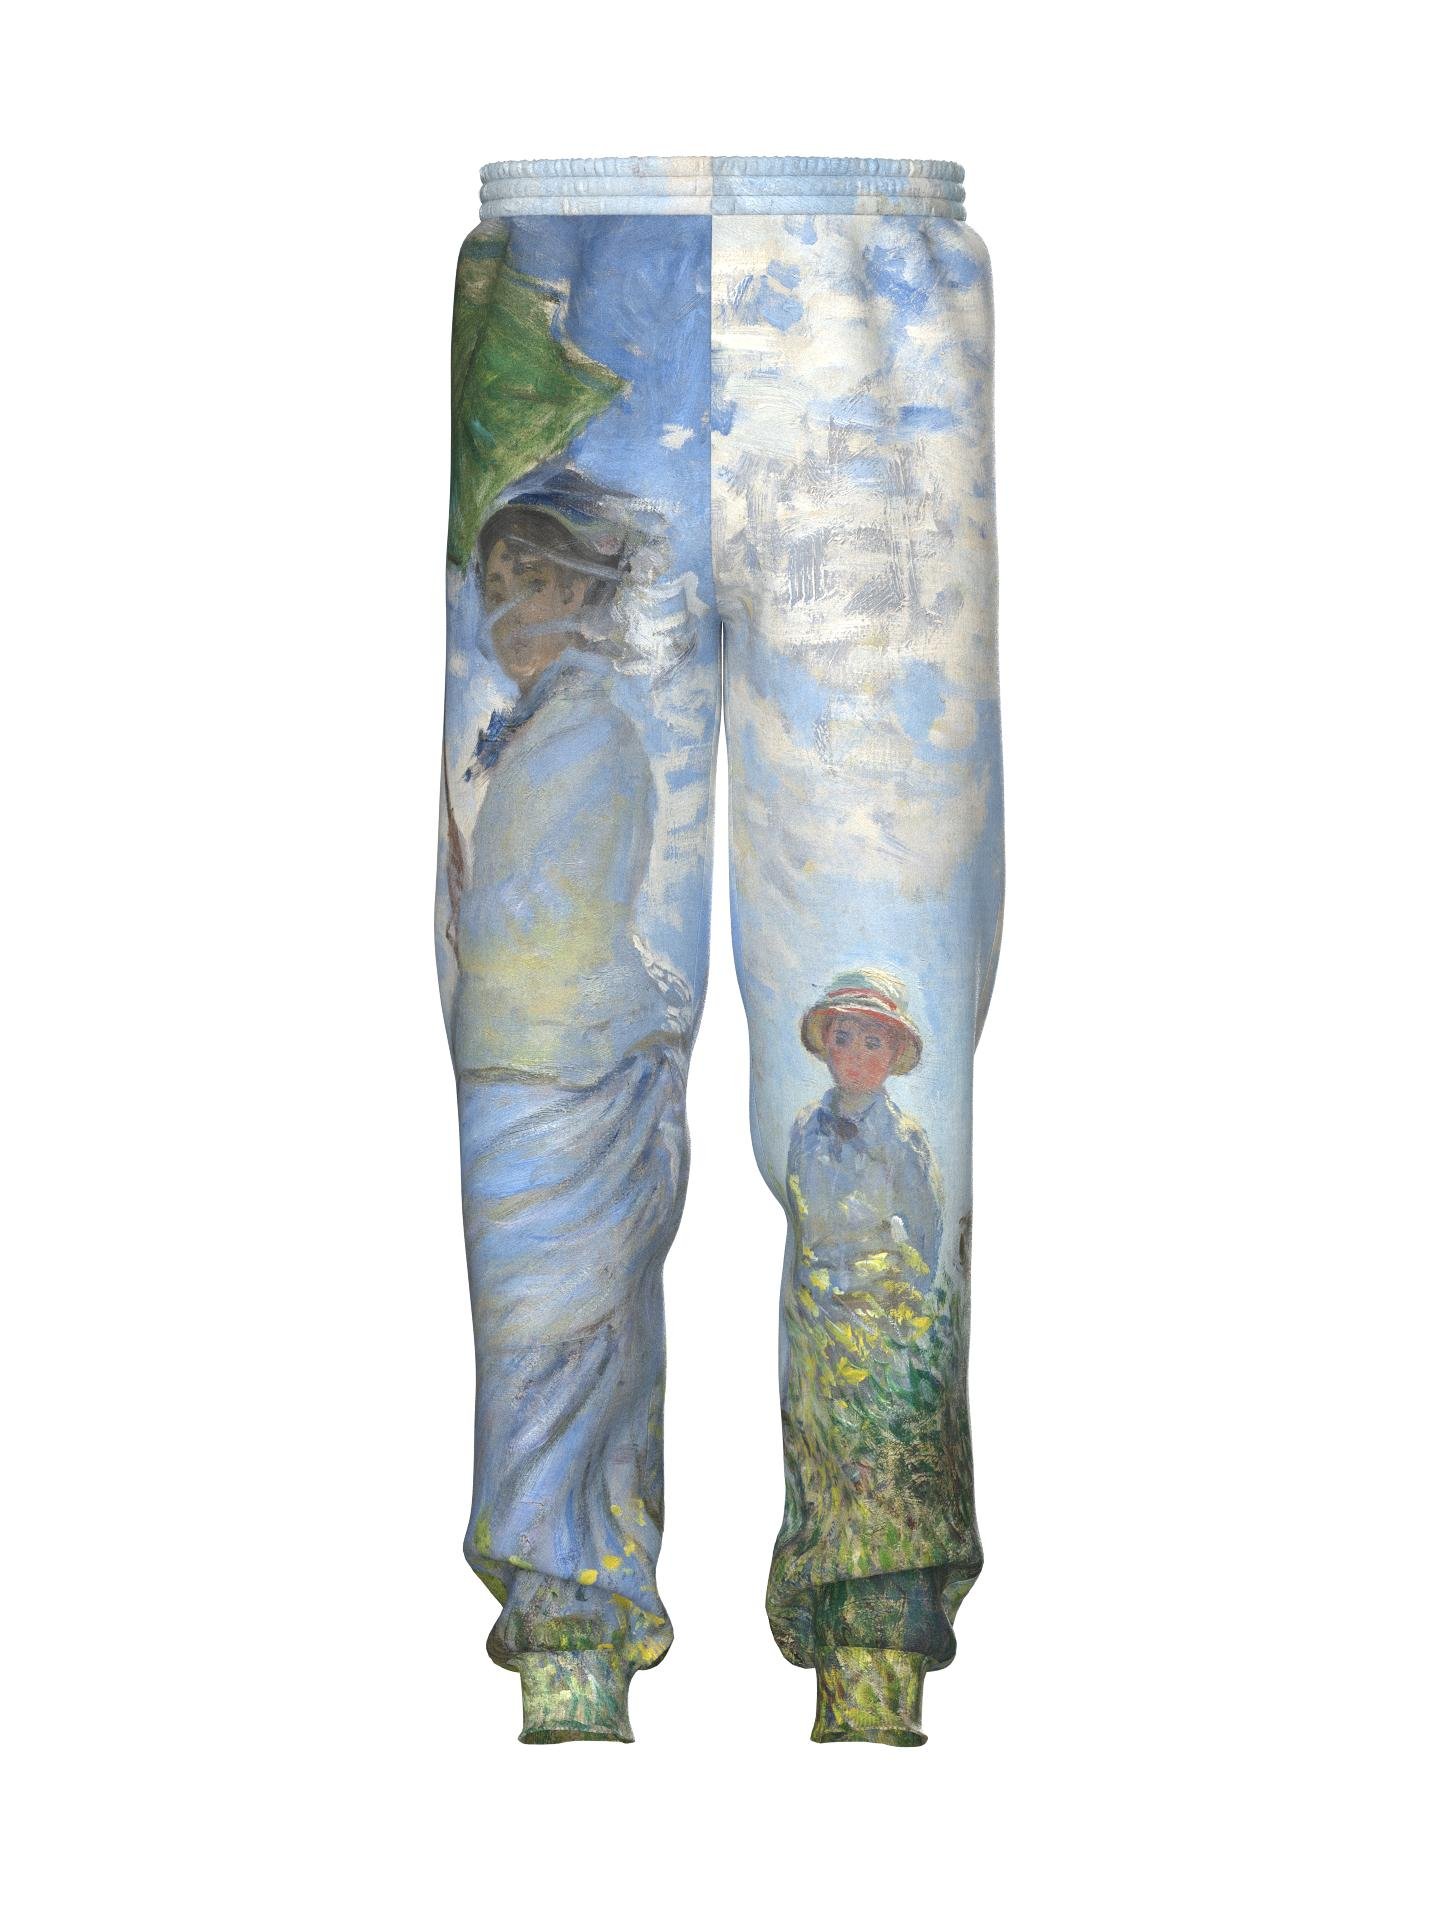 Sweatpants - Woman with a Parasol - Madame Monet and Her Son by DRESSX